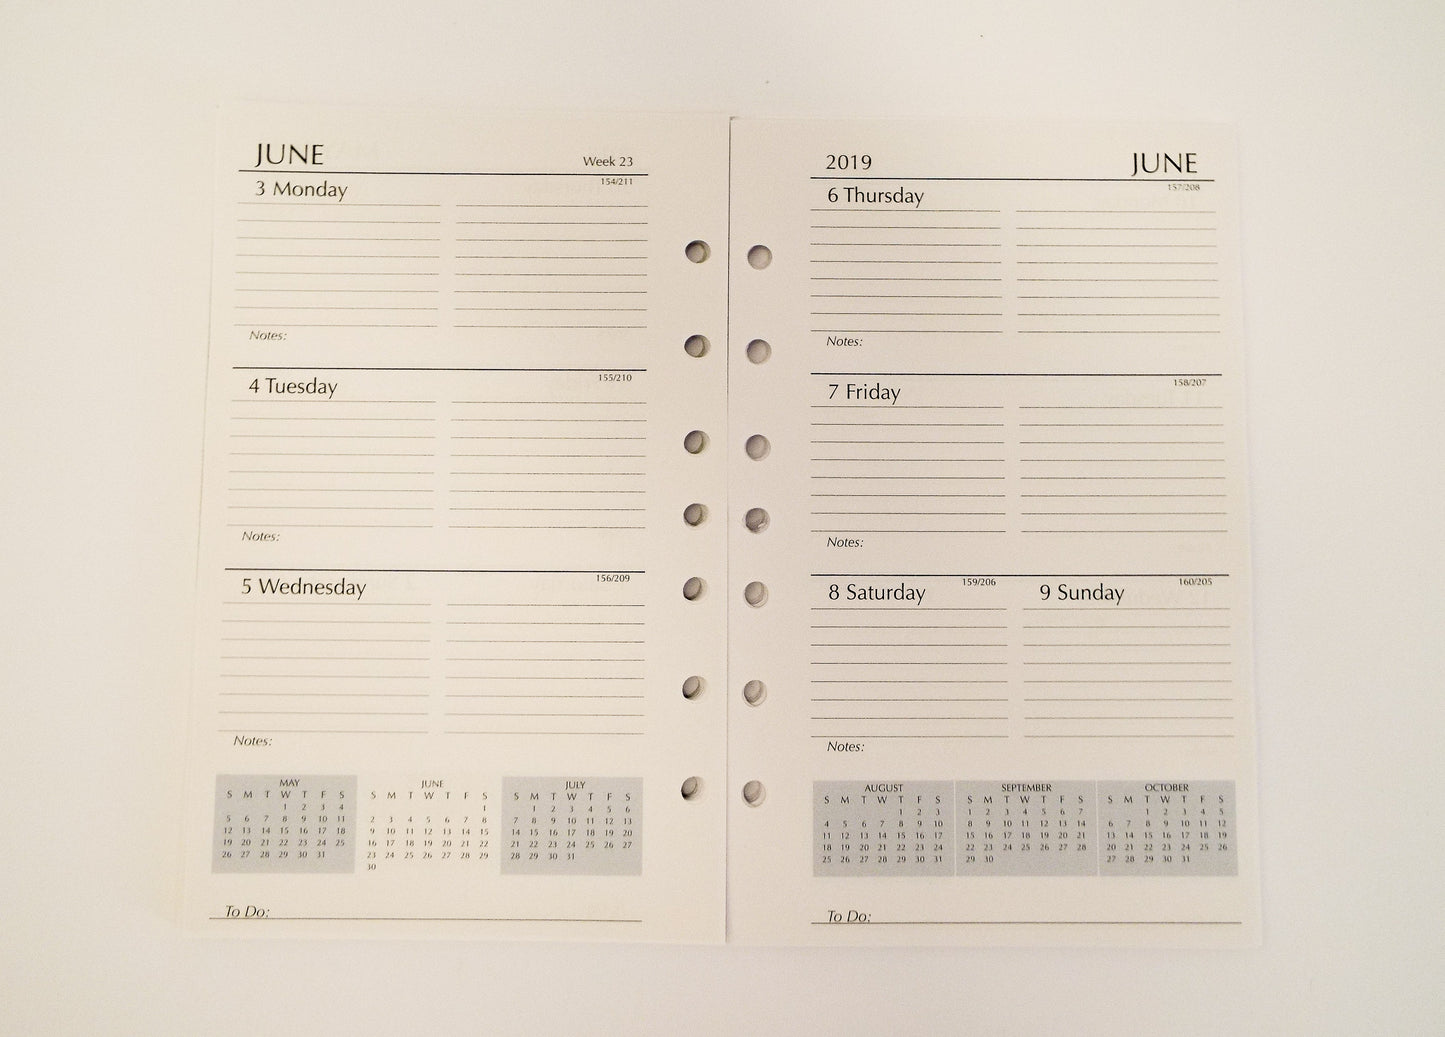 McCarthy Planner- Item MW58P7 12 Month Planner and Address Refill Combo  White paper. 8-1/2 x 5-1/2 7 hole. Weekly and Monthly View Format. One planner; with two formats. Also includes Area Codes and Time Zone Map, Important Dates, International Holidays, and Toll-Free Numbers and Web Sites! 48 sheets (96 pages) supplemental section included. The supplemental section has 20 ruled, 24 to-do and 54 address pages.  Made in the USA!